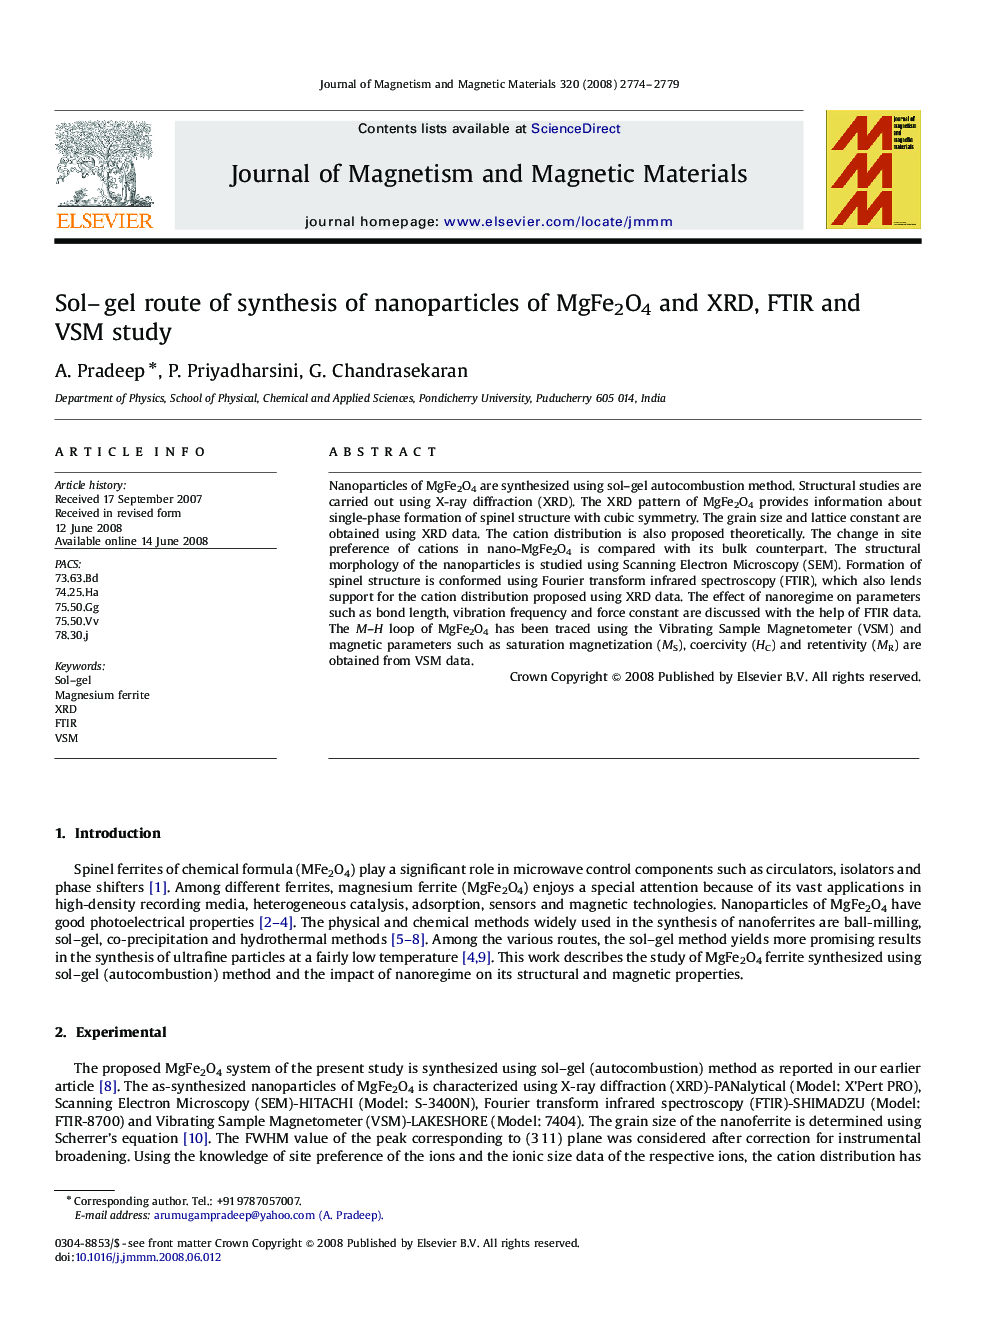 Sol–gel route of synthesis of nanoparticles of MgFe2O4 and XRD, FTIR and VSM study